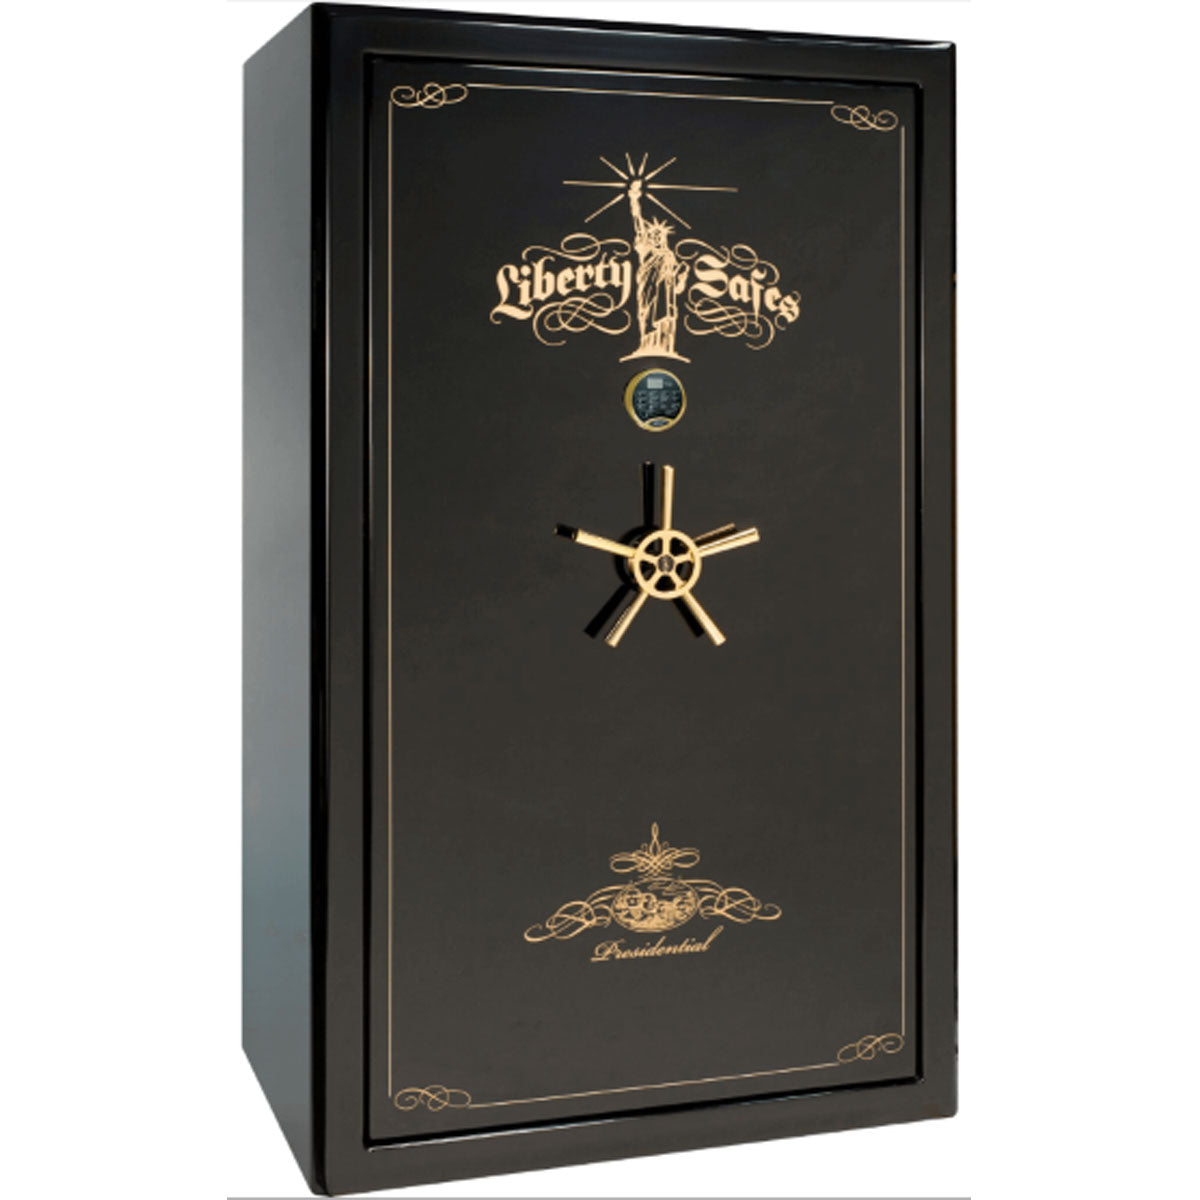 Liberty Safe Presidential 50 in Black Gloss with 24k Gold Electronic Lock, closed door.